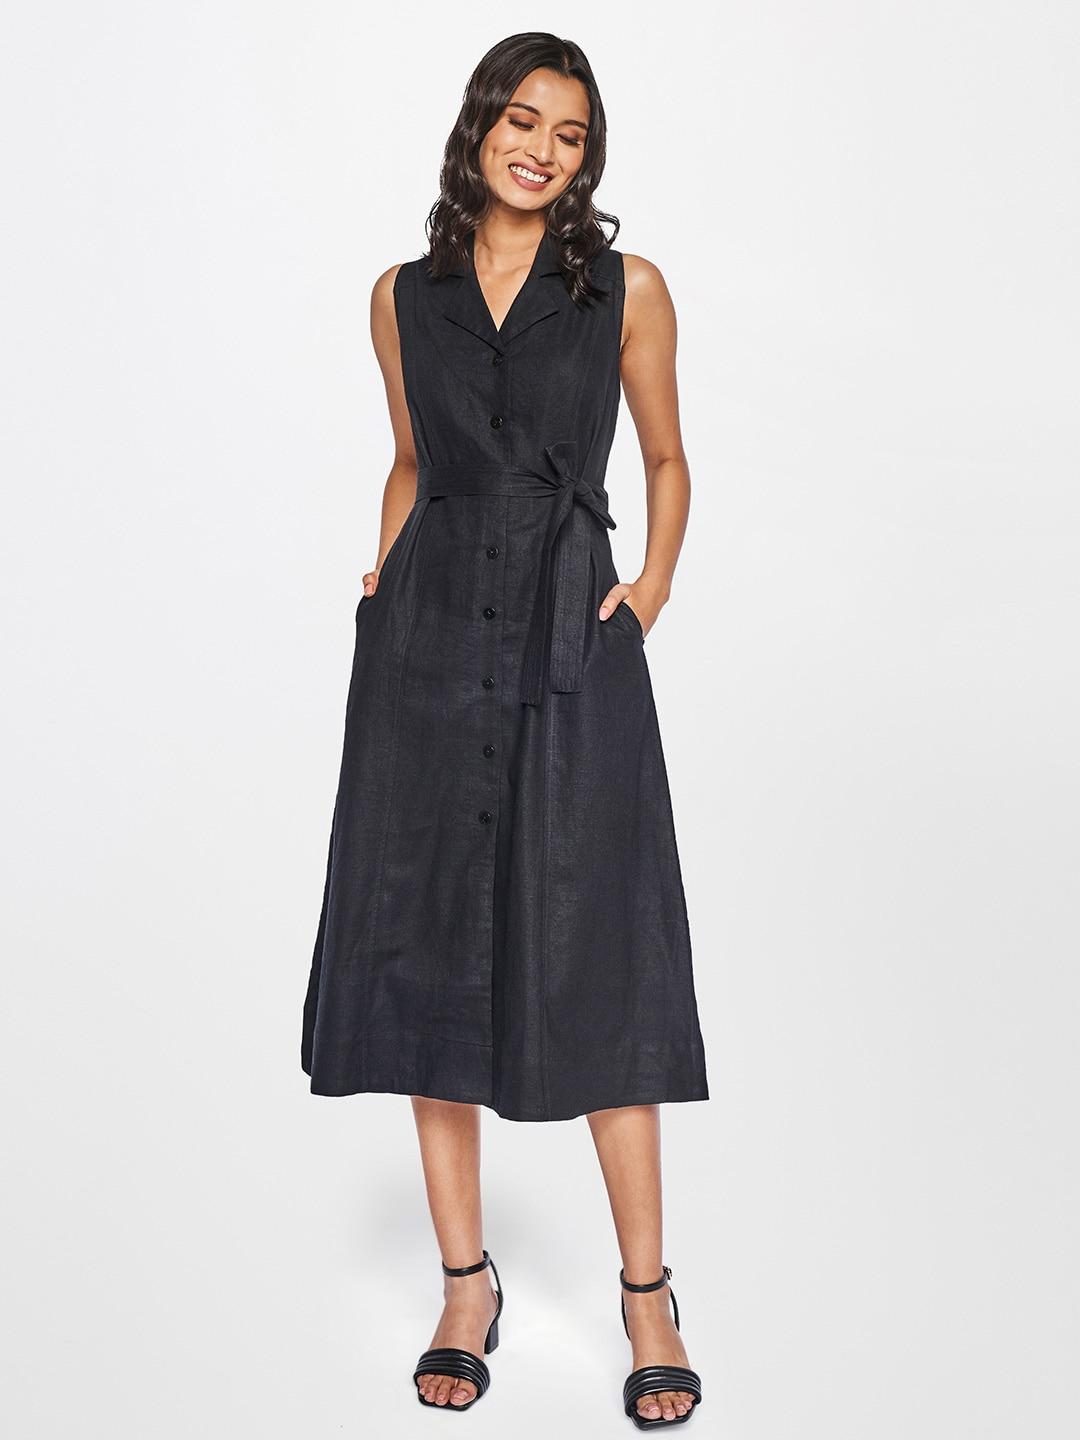 AND Black Linen Midi Fit and Flare Dress